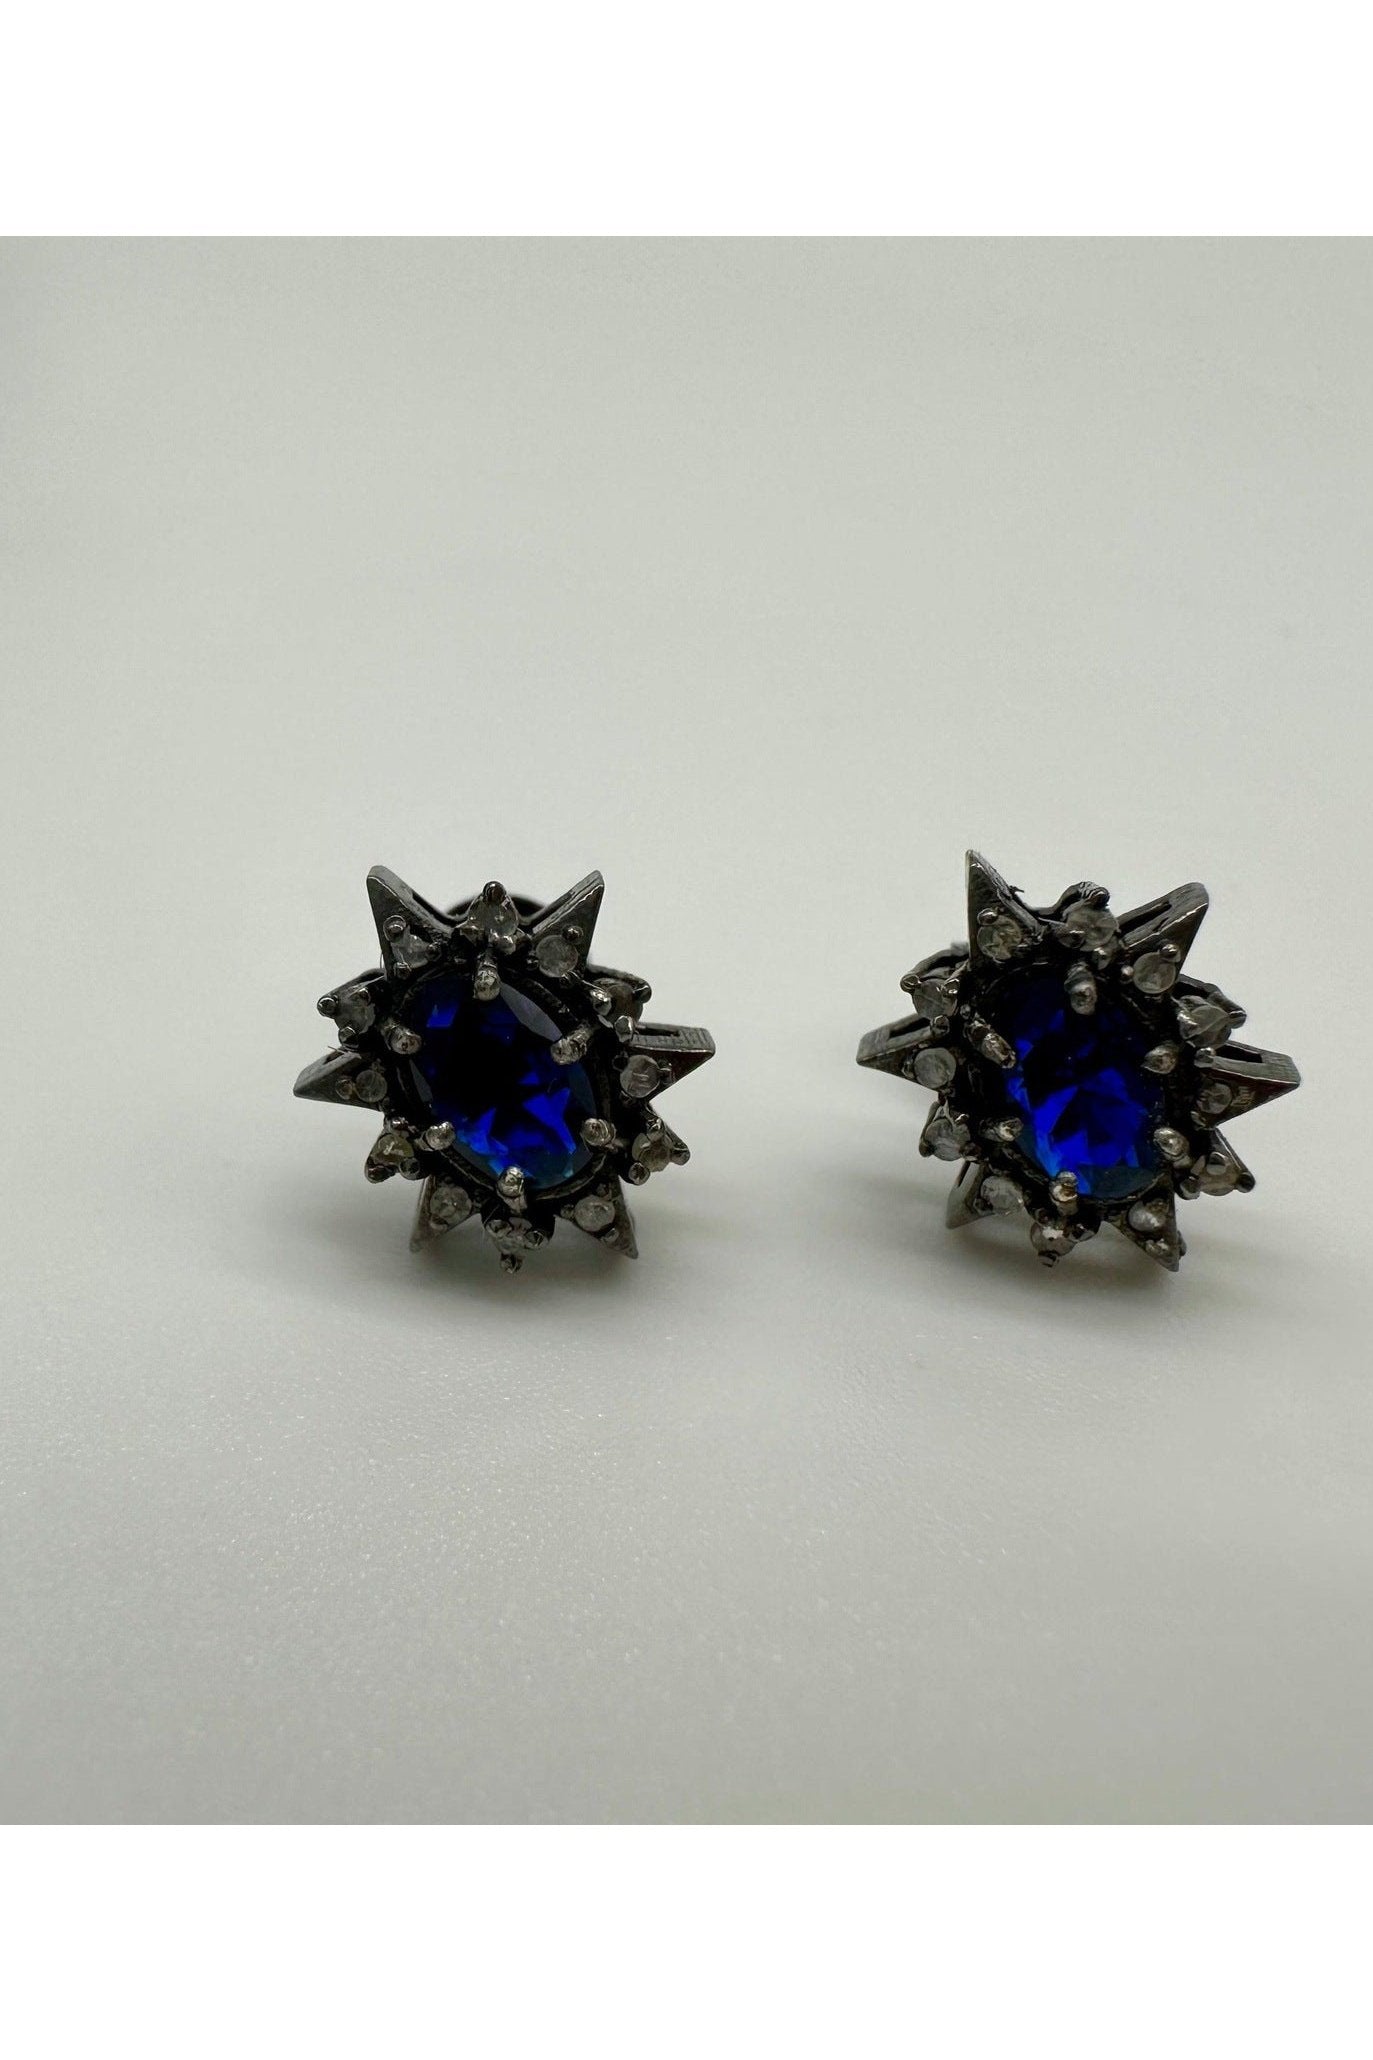 Evergreen Collections Sapphire Earring Stud